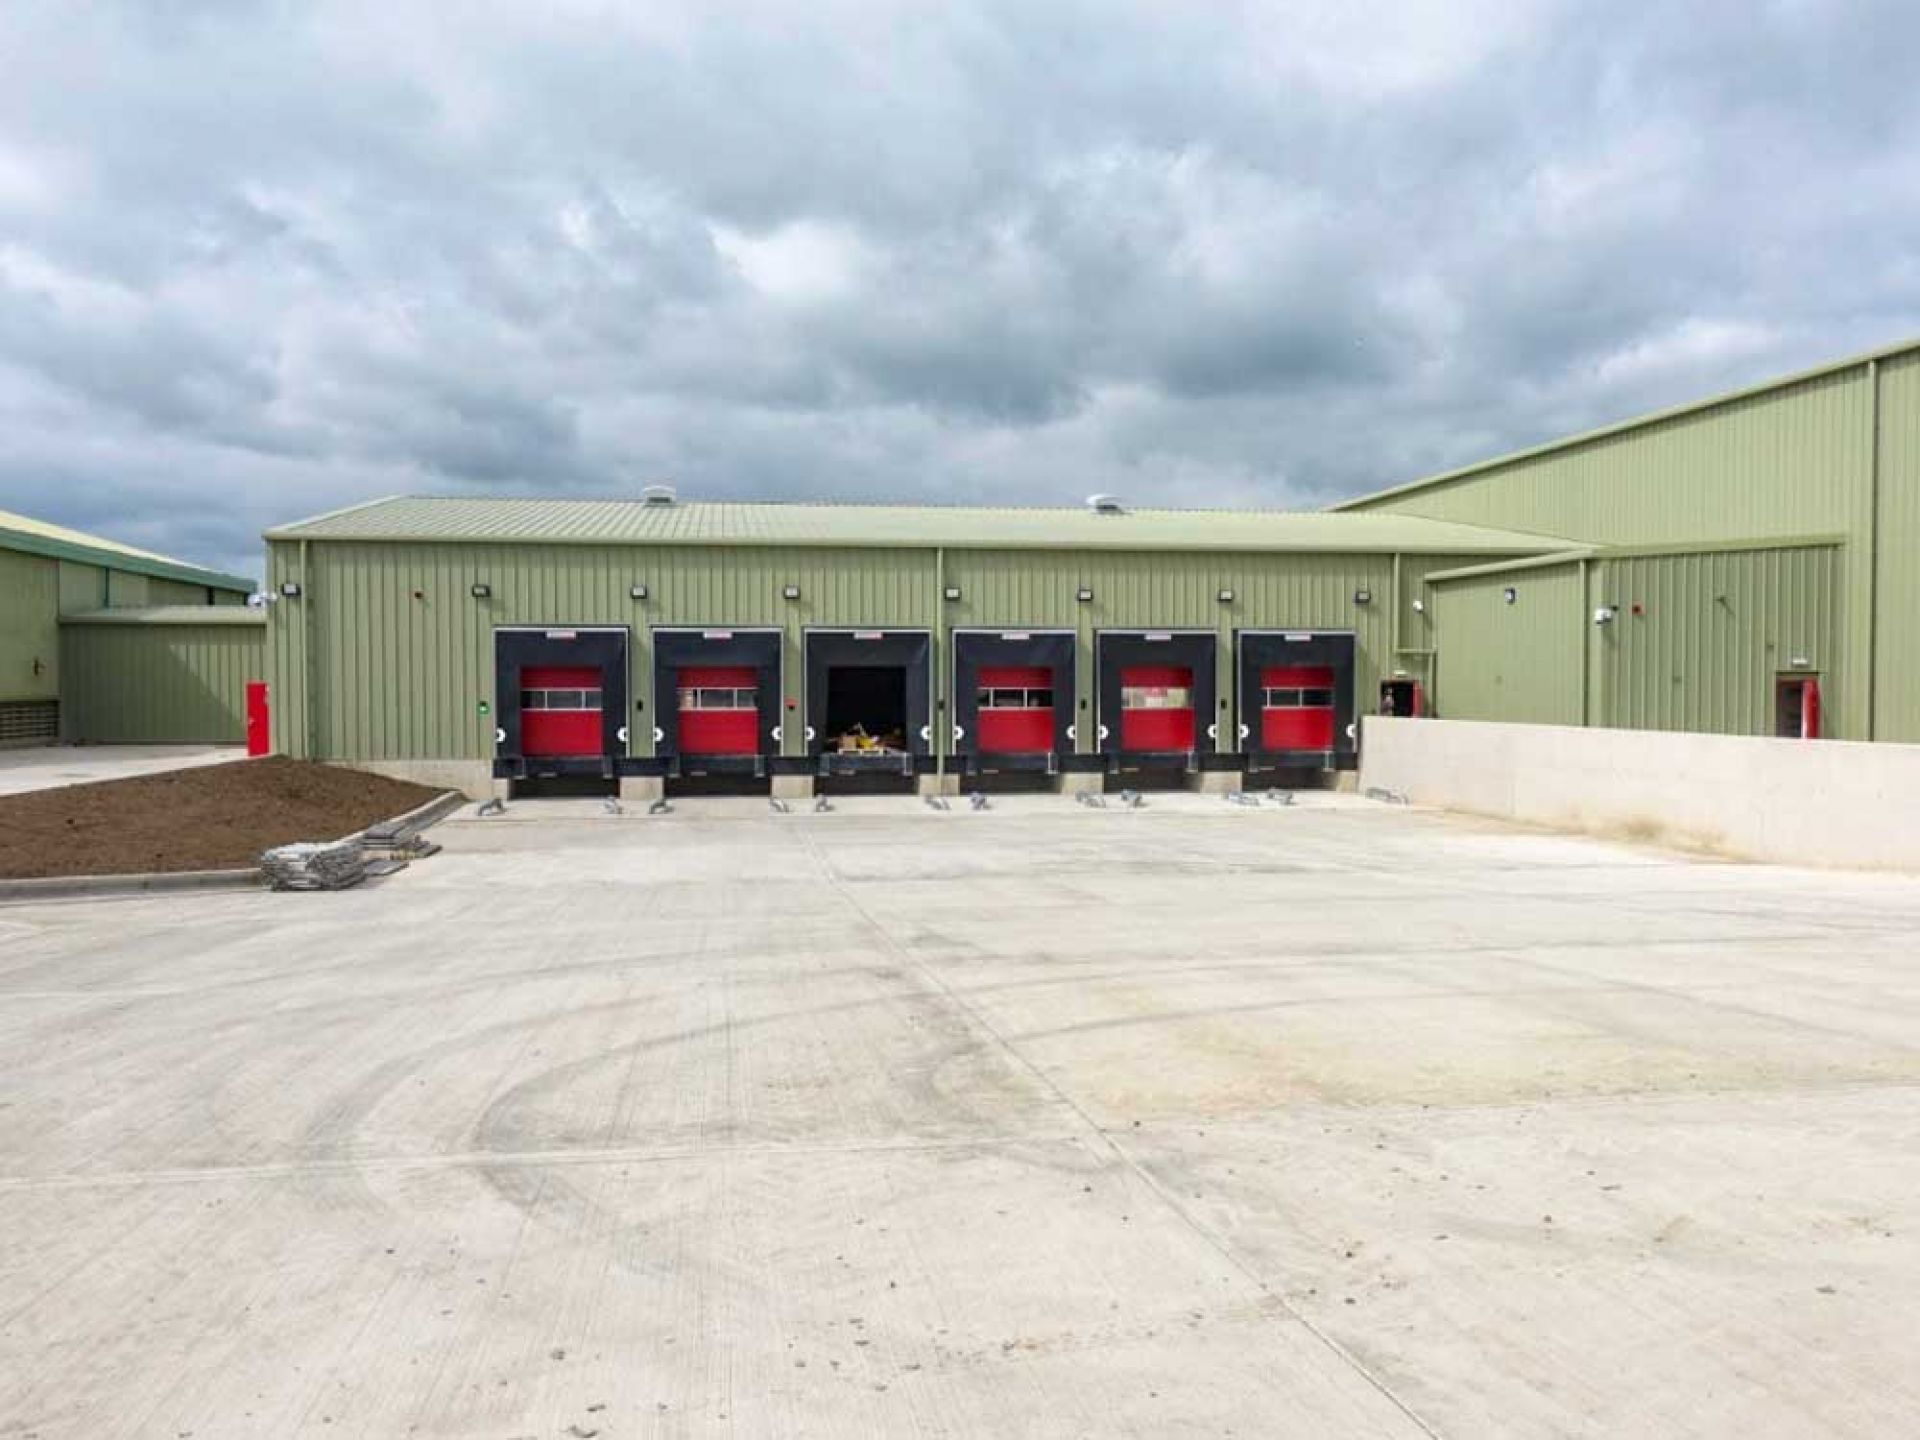 Large green completed warehouse development with red loading bays.